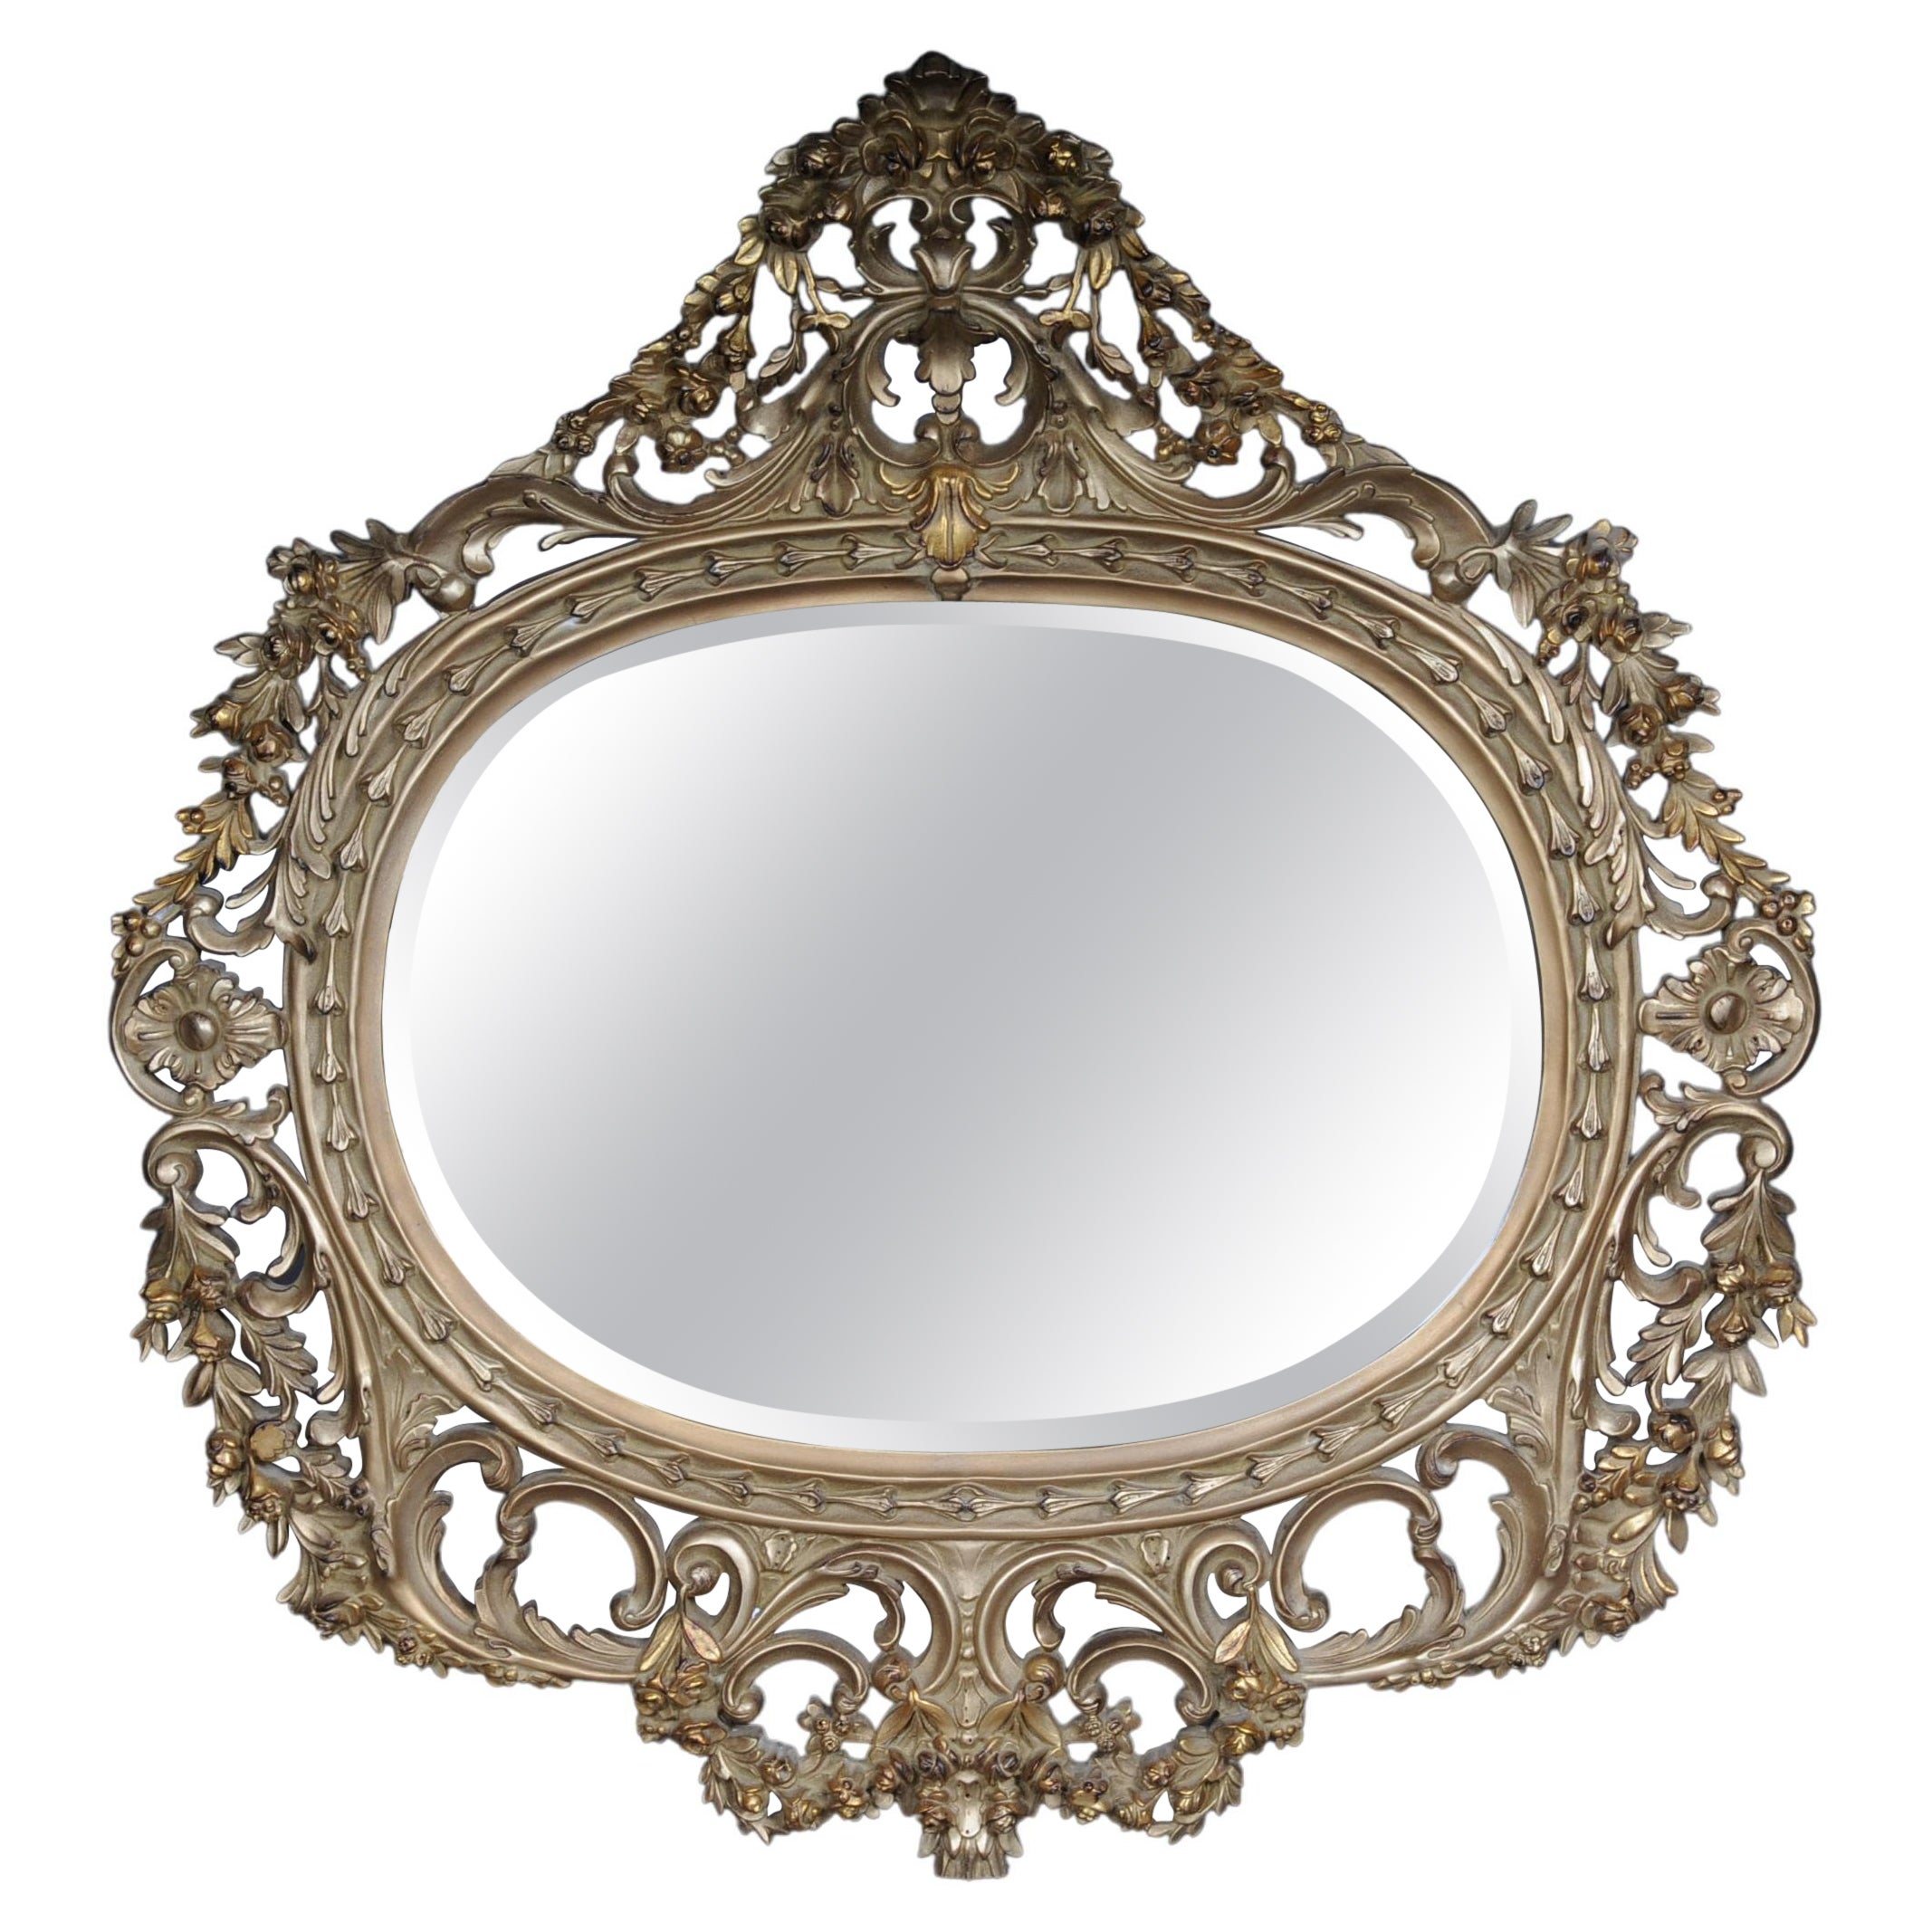 Richly Carved Royal Wall Mirror in Louis XV, Beech Wood For Sale